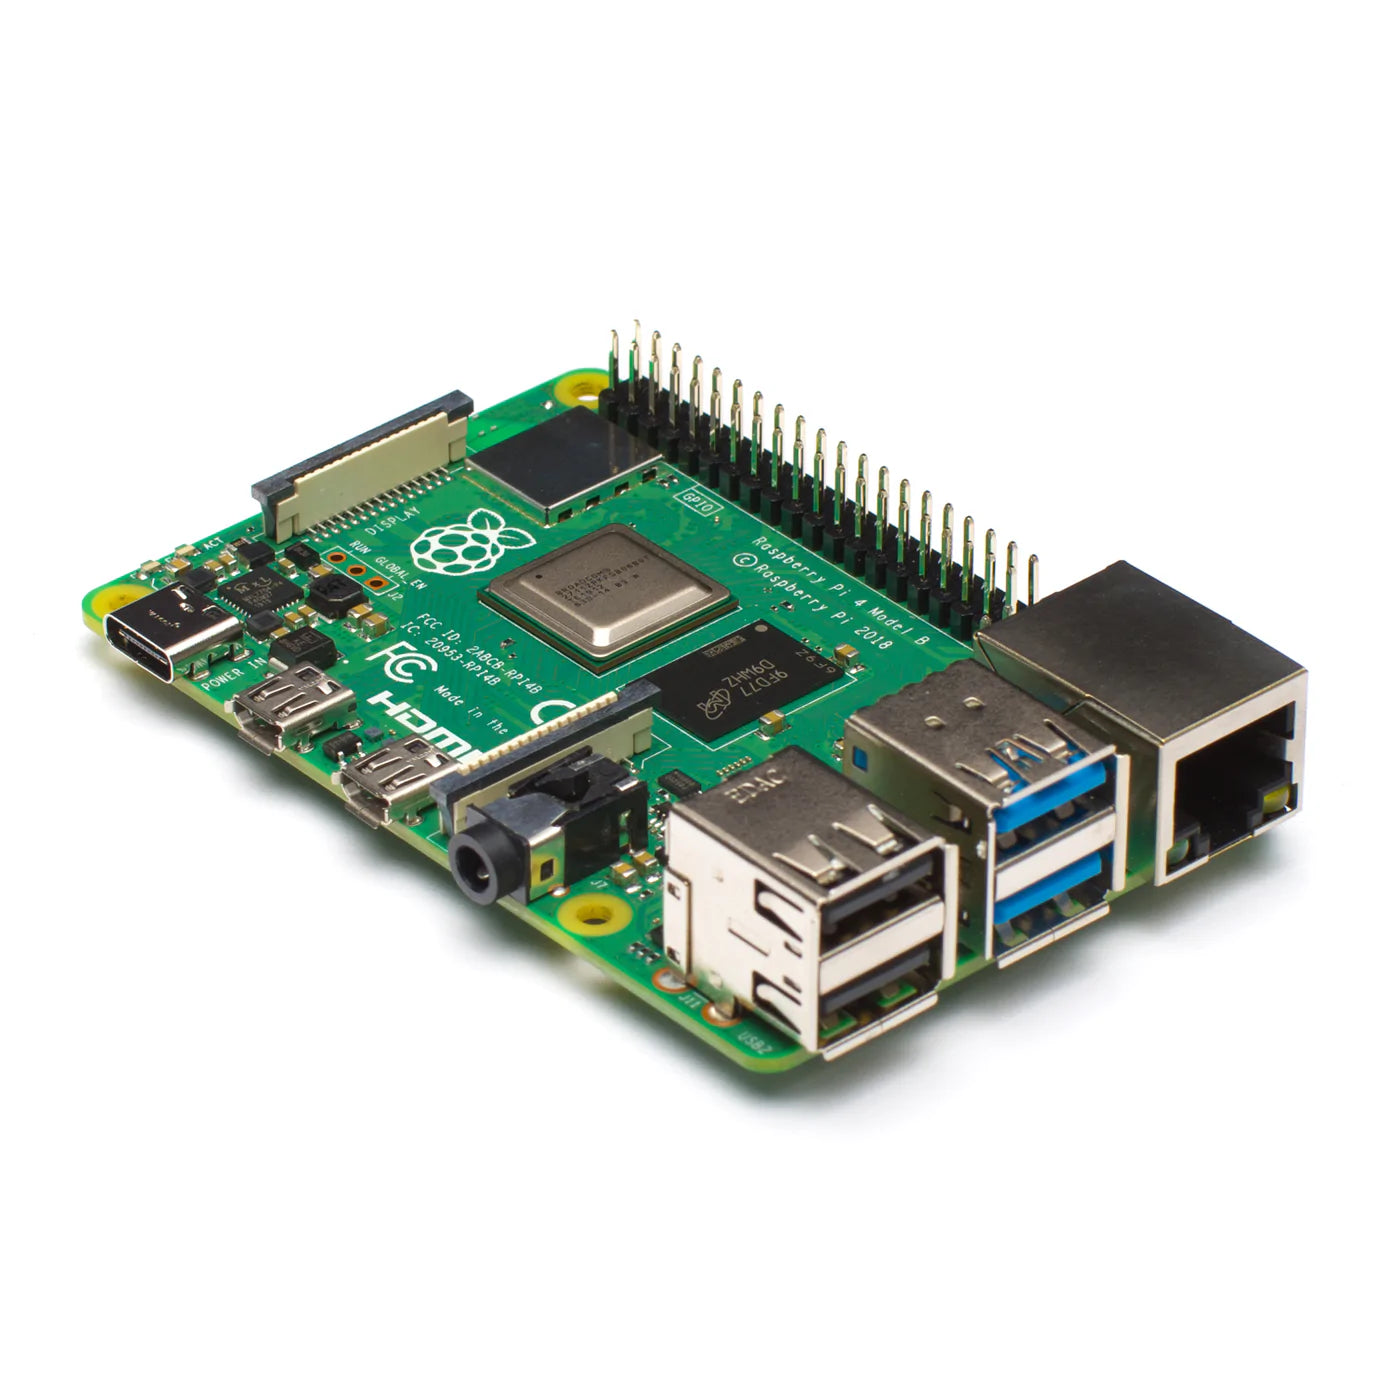 Raspberry Pi computers and microcontrollers